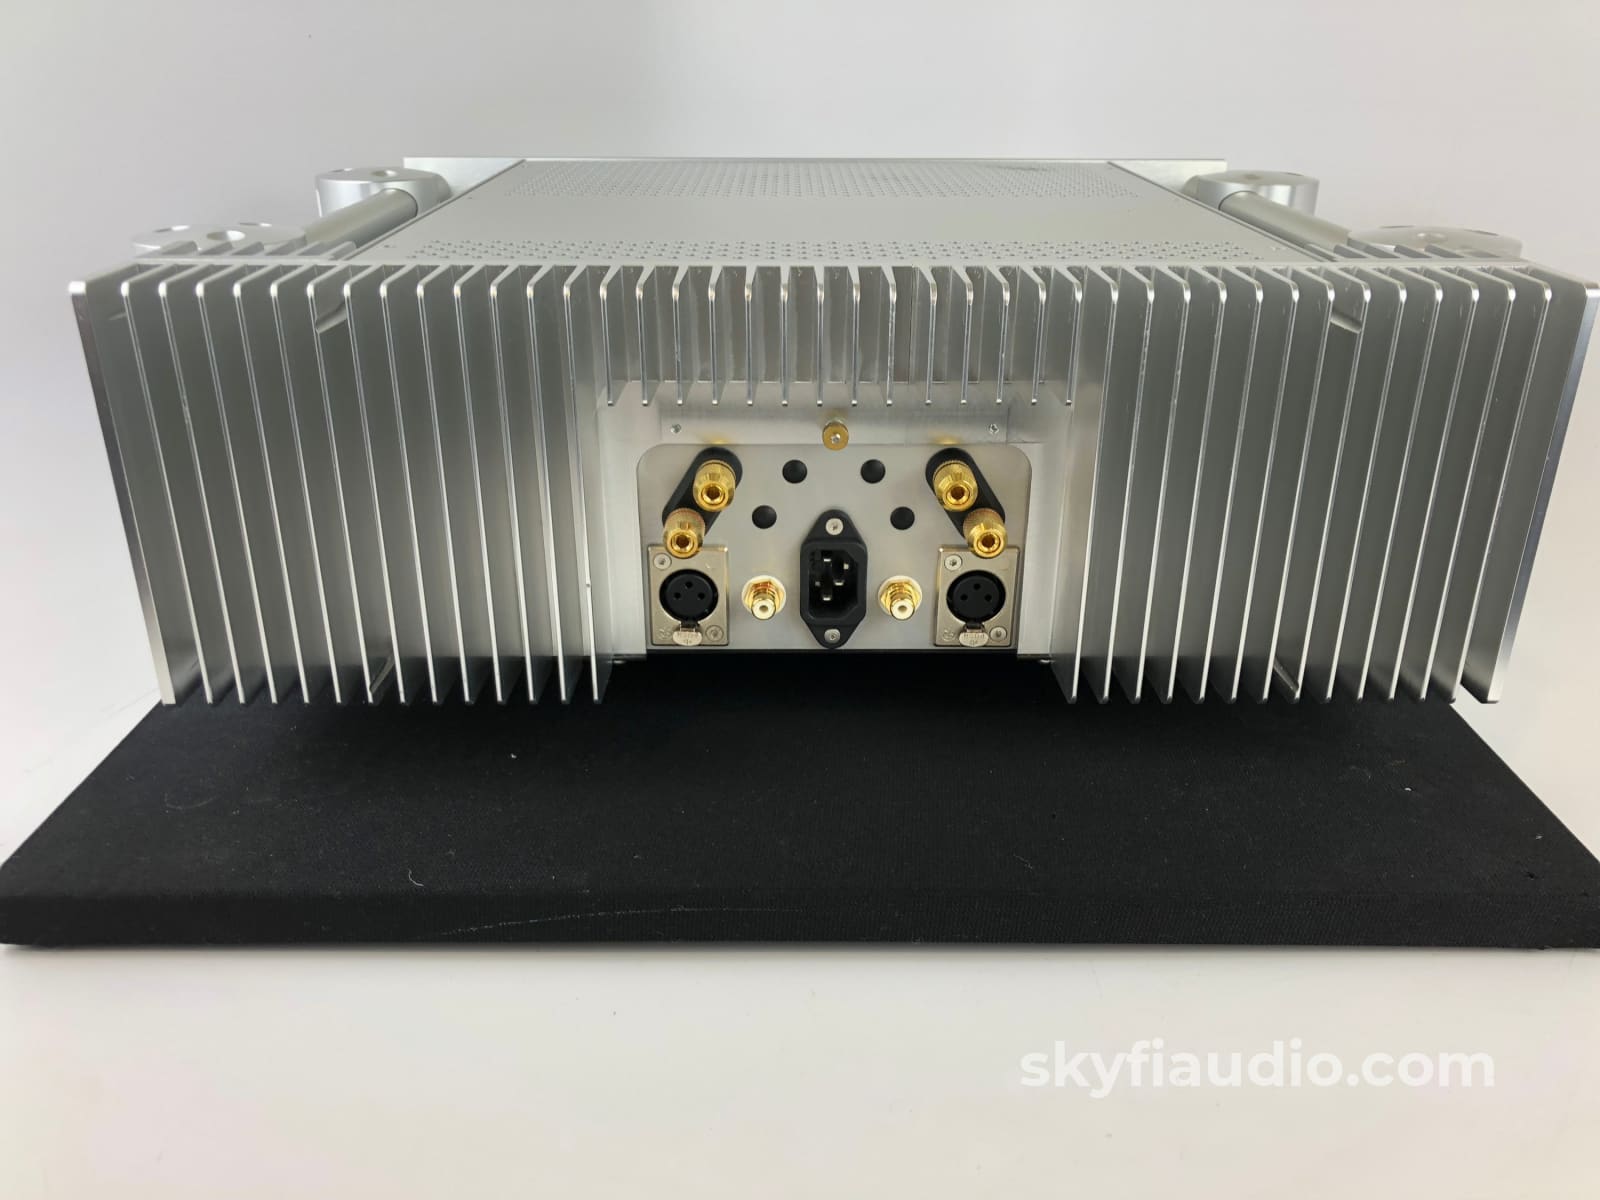 Chord Spm-1050 Solid State 200W Amplifier